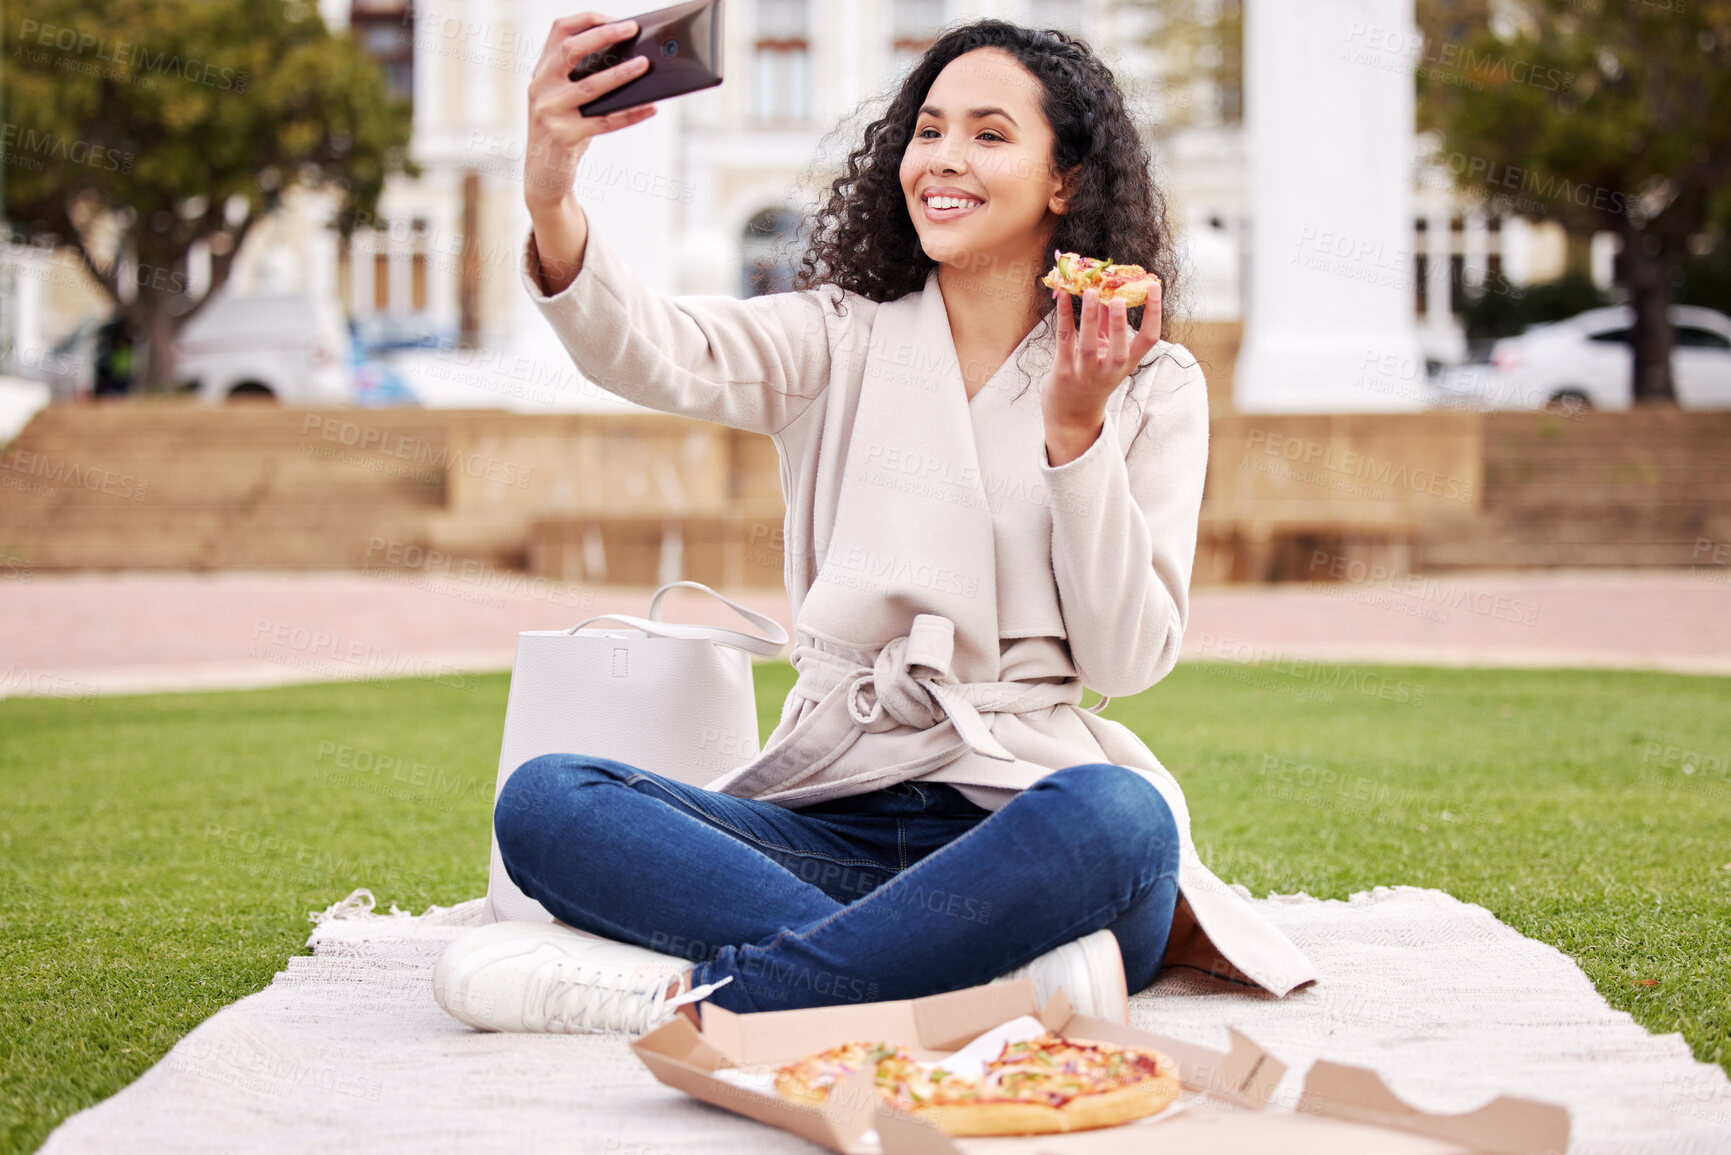 Buy stock photo Shot of an attractive young female university student taking selfies outside on campus during her break